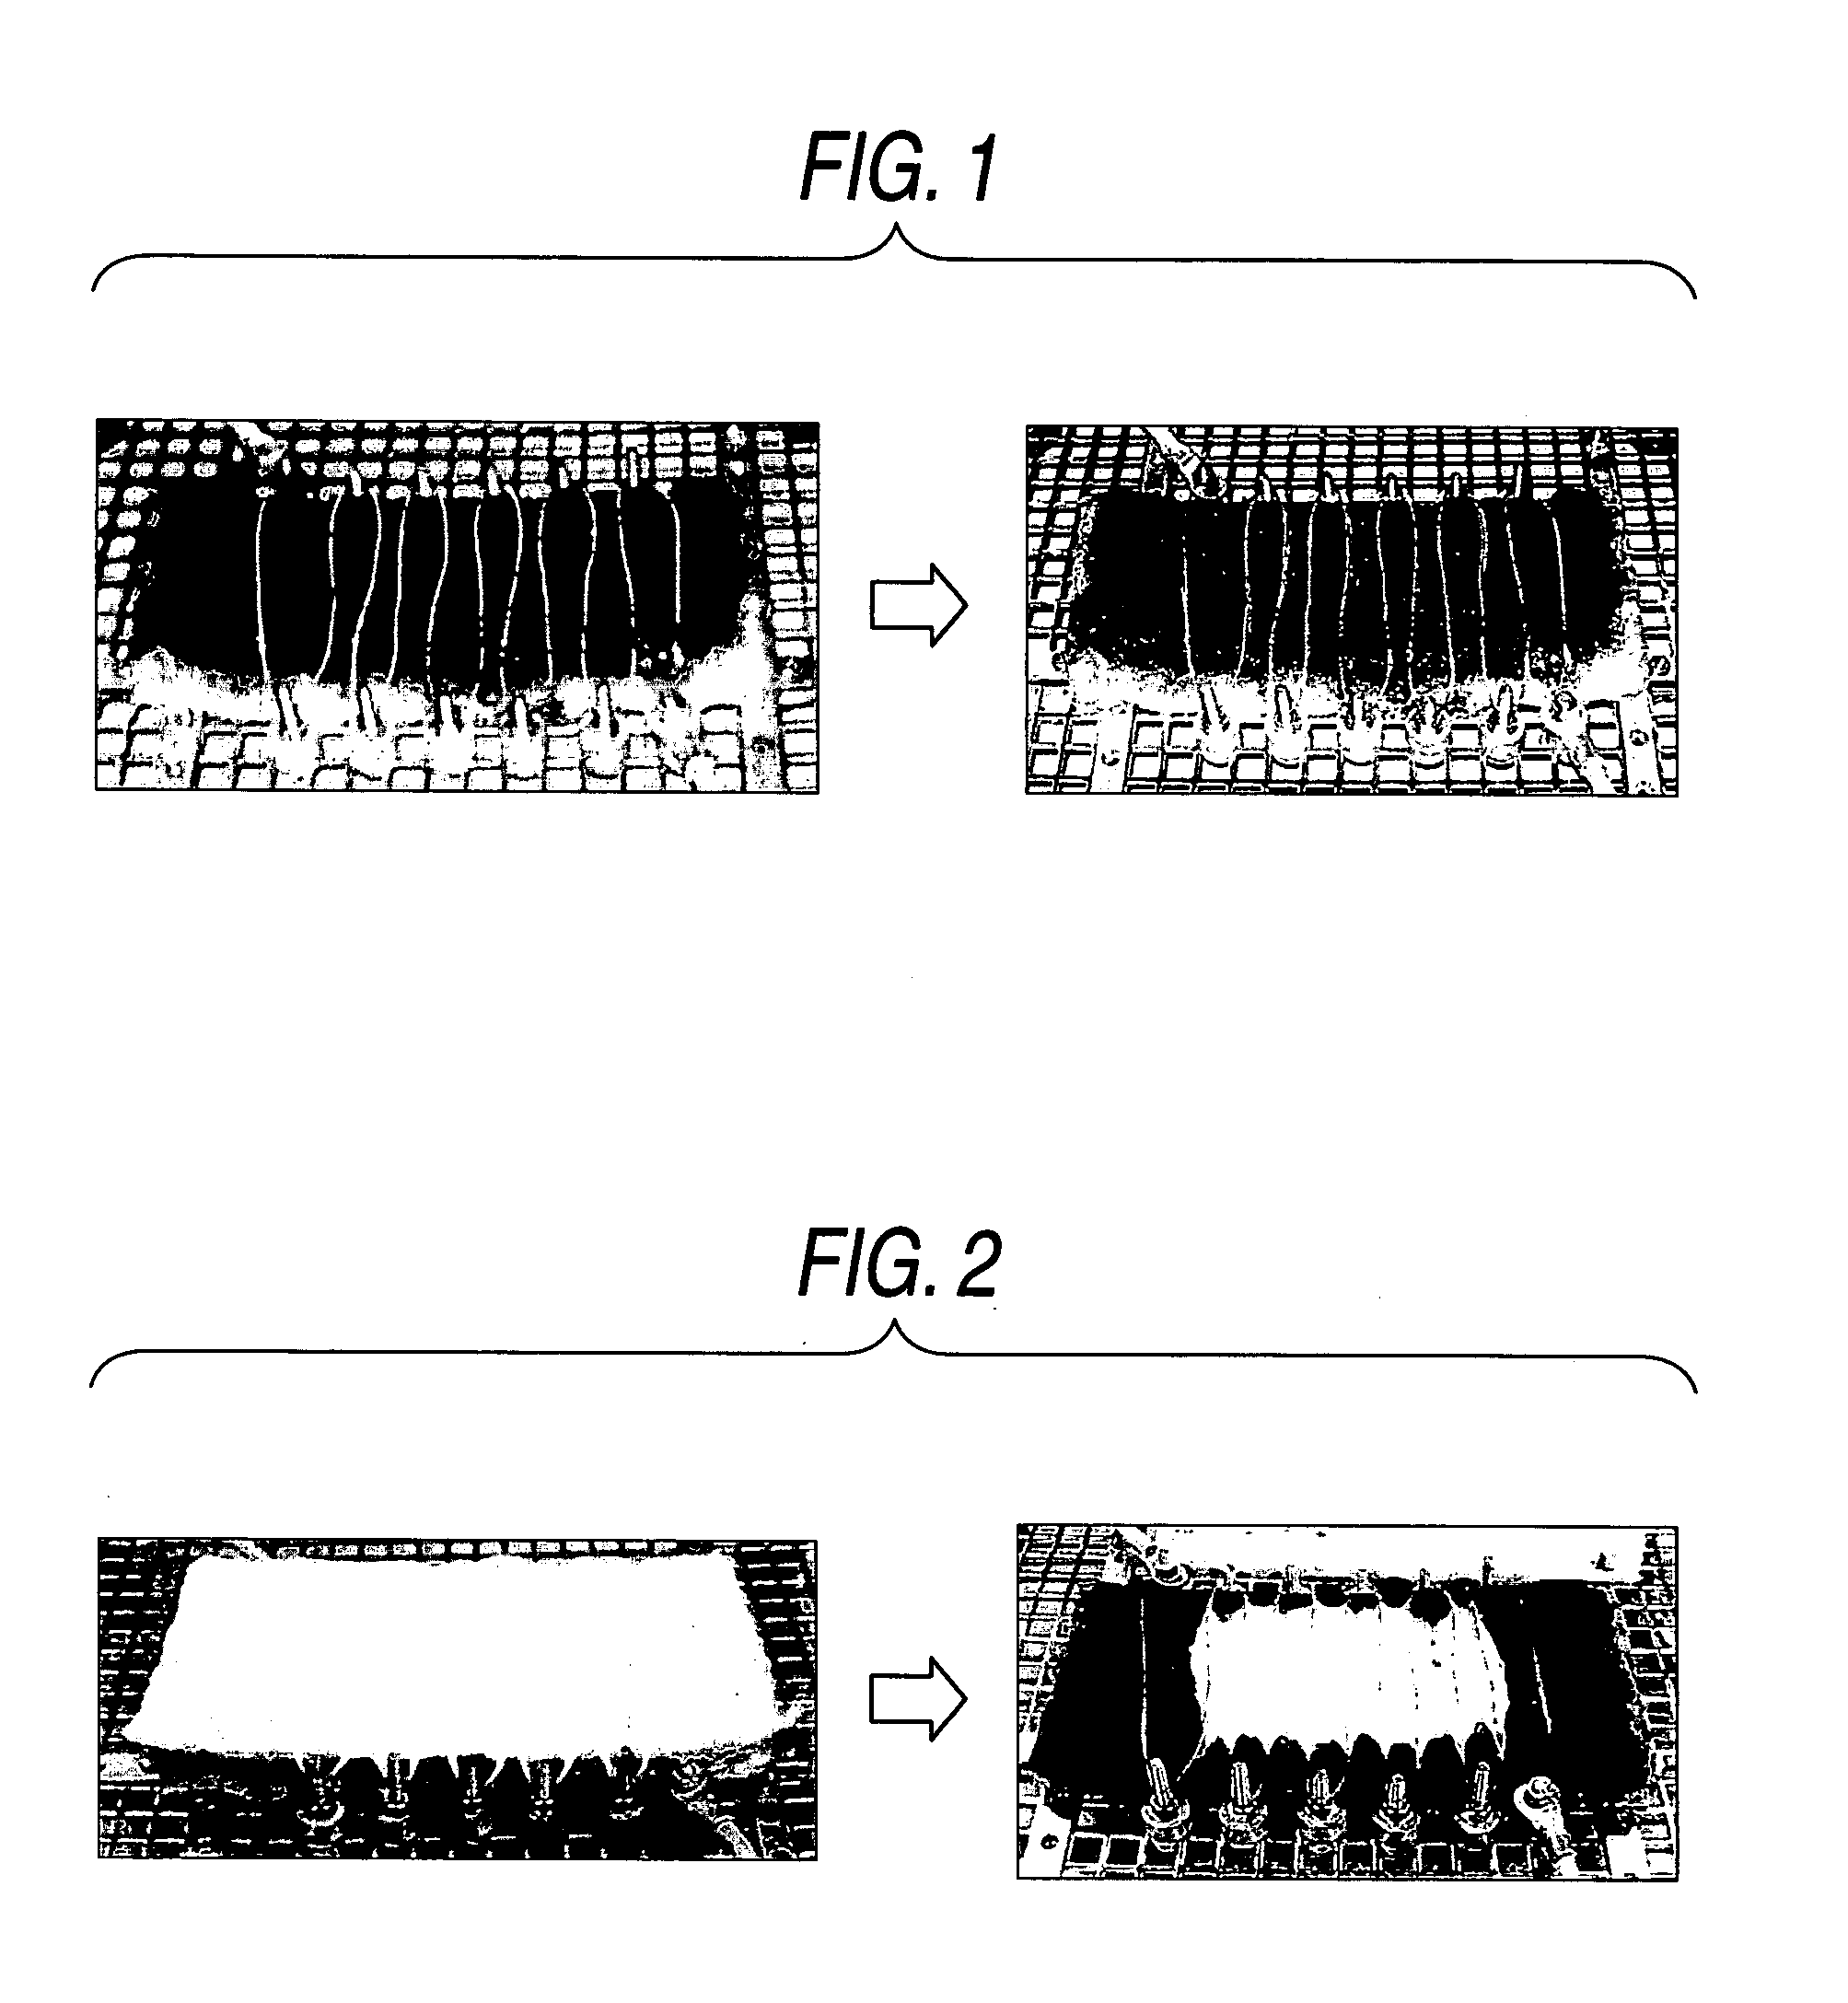 Particulate matter removal apparatus